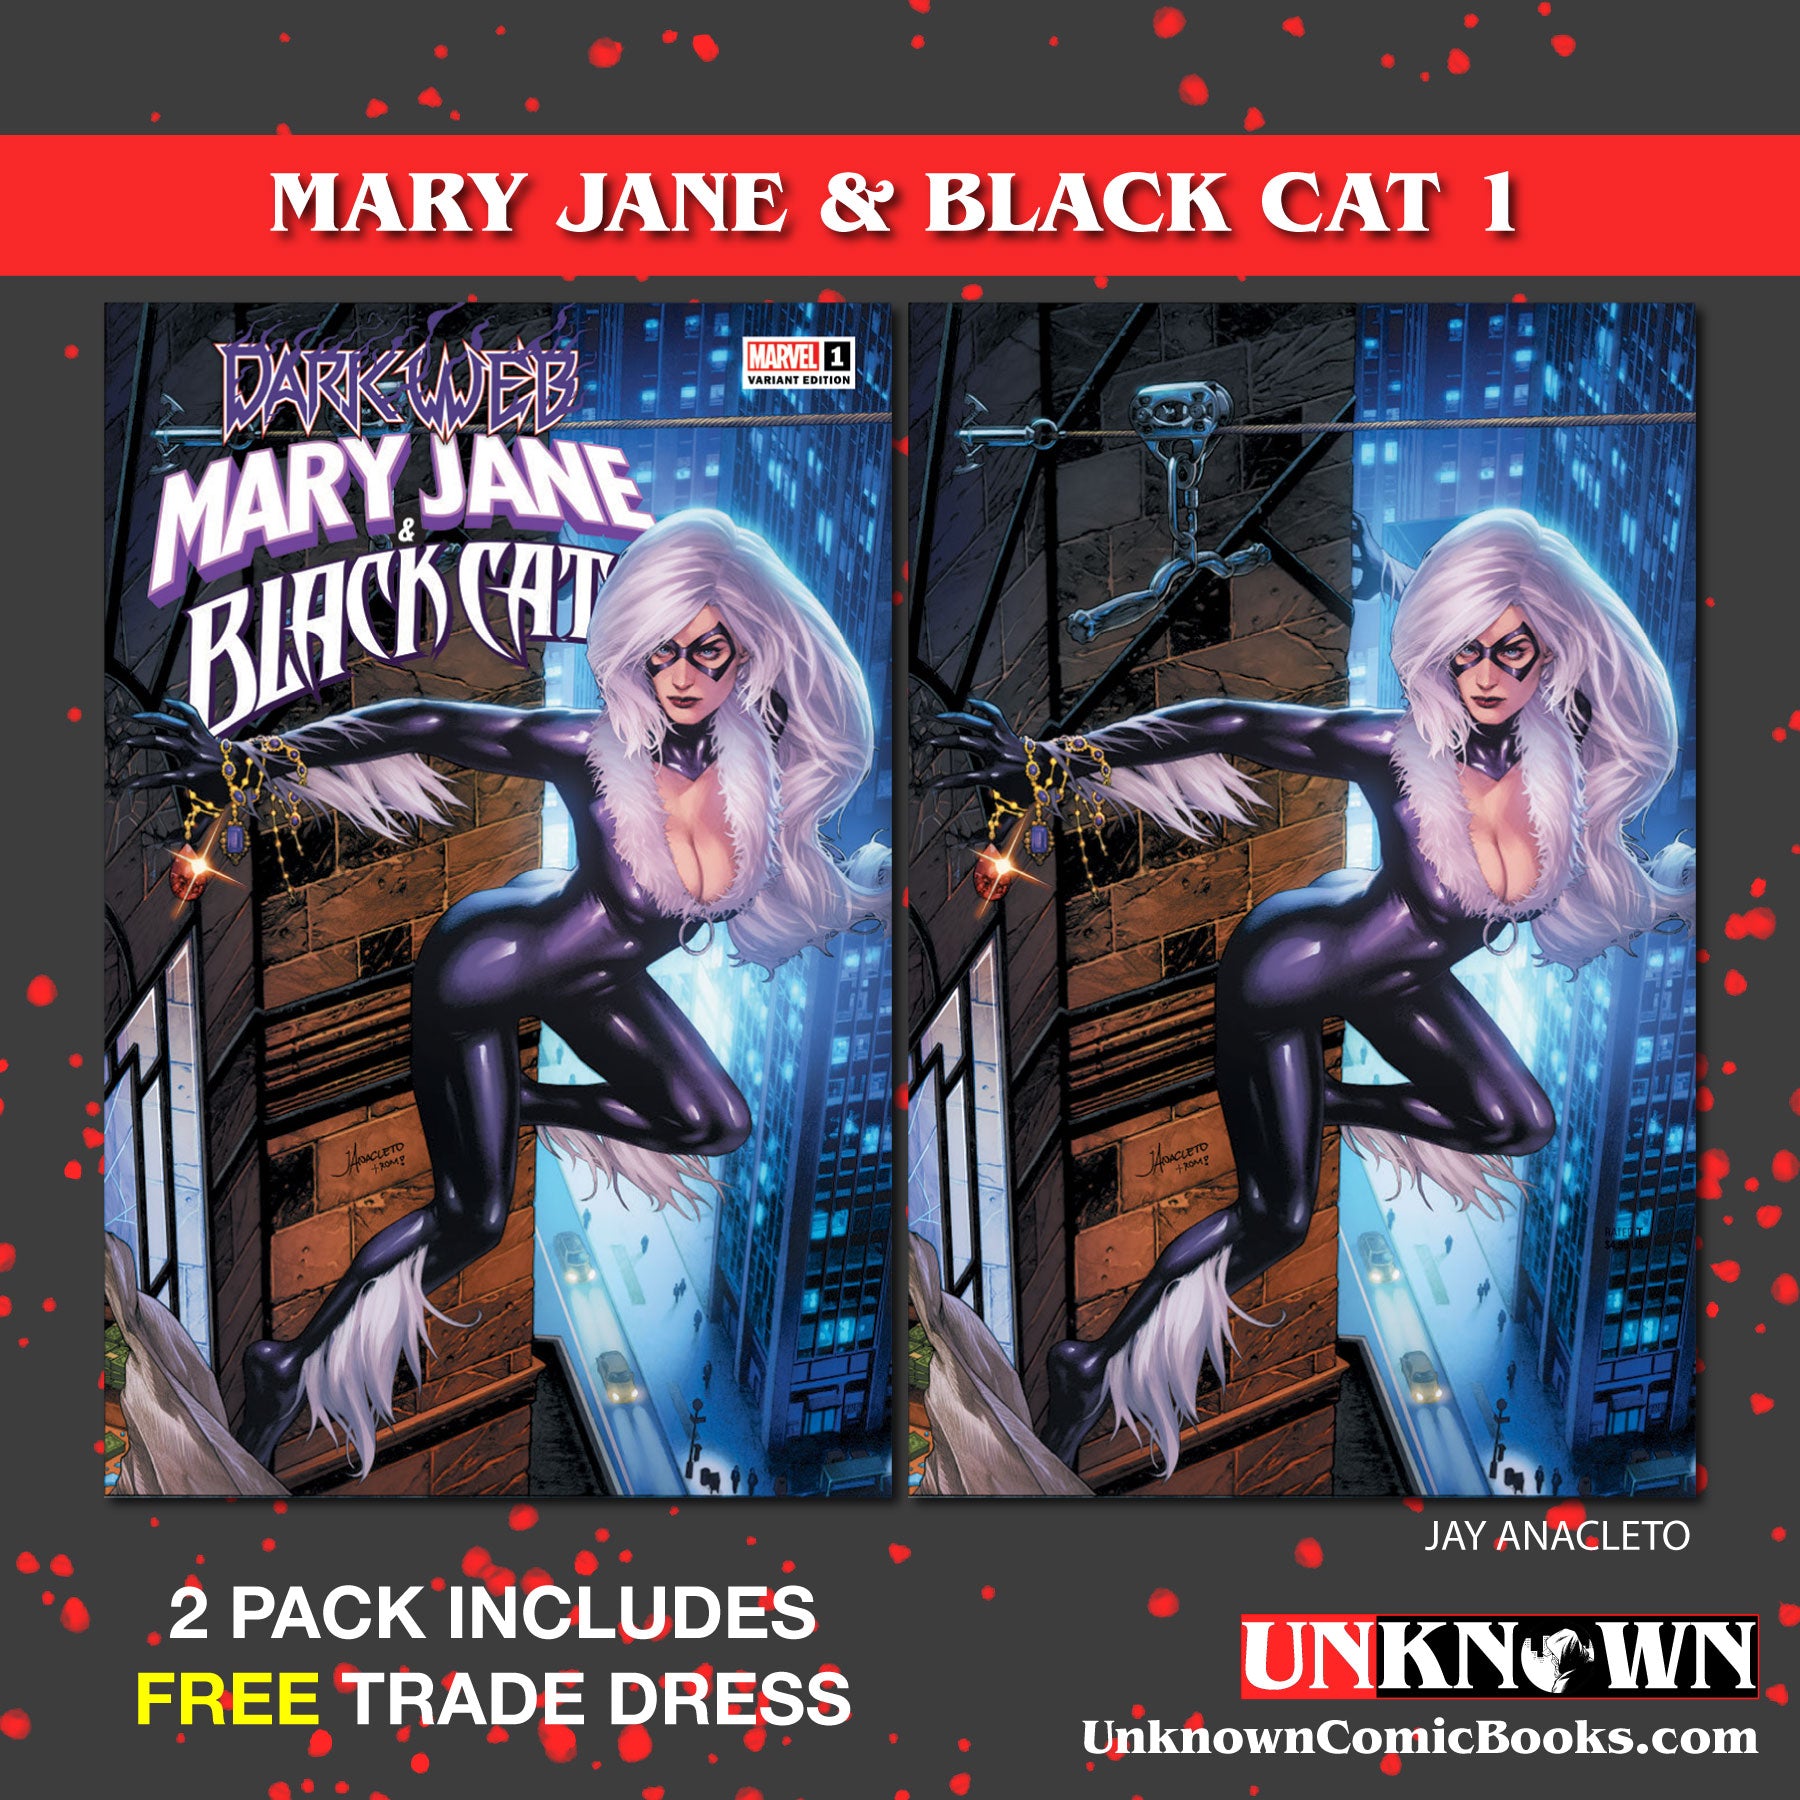 2 PACK **FREE TRADE DRESS** MARY JANE & BLACK CAT #1 [DWB] UNKNOWN COMICS JAY ANACLETO EXCLUSIVE VAR (12/21/2022)